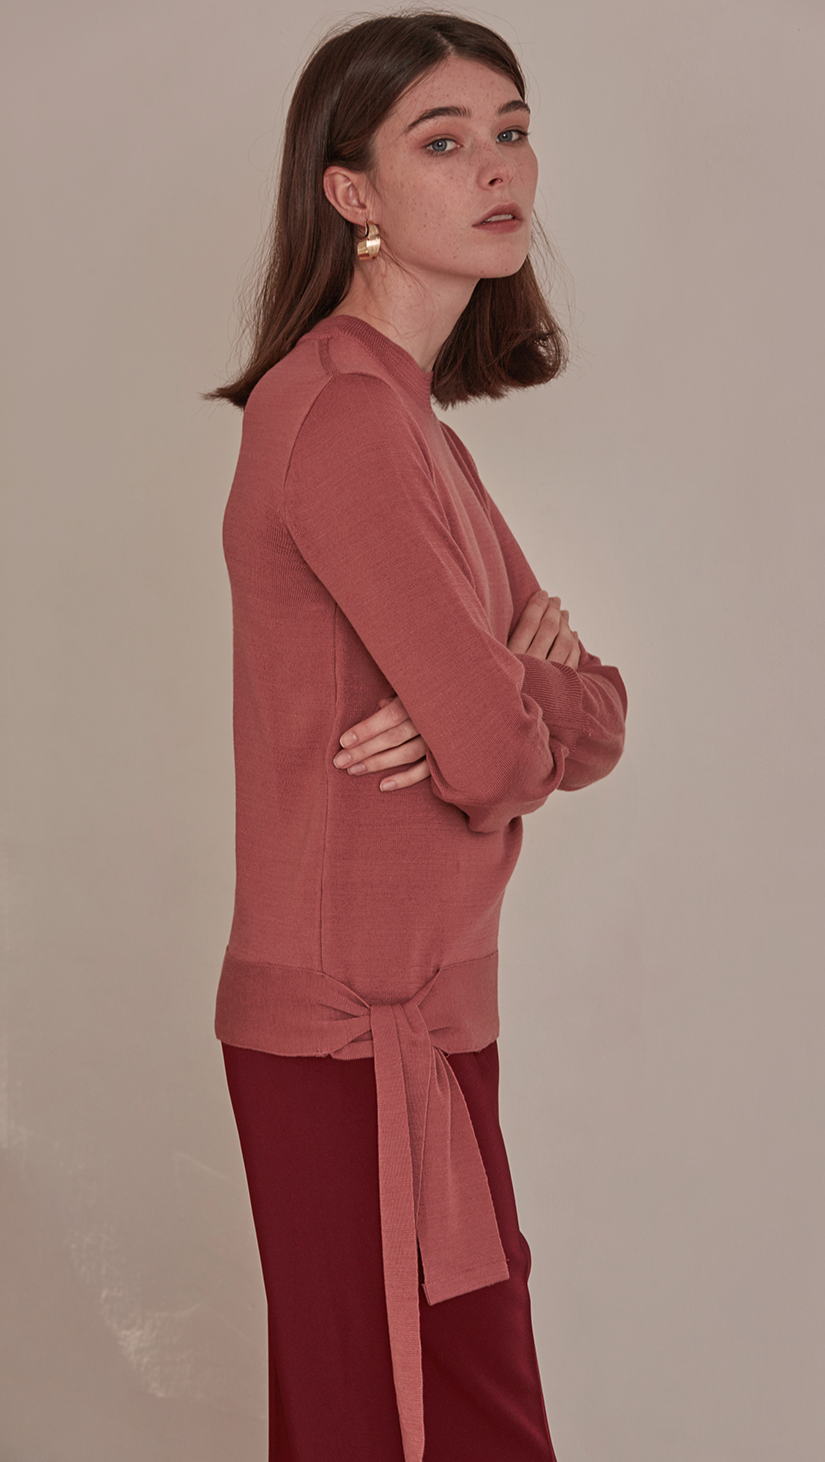 Féte Sweater in Pink. Crewneck long sleeved lightweight knit. Self wrap tie on the side of hem. Slit at cuff. Pull on. Slim fitting body with a long tie sash. 